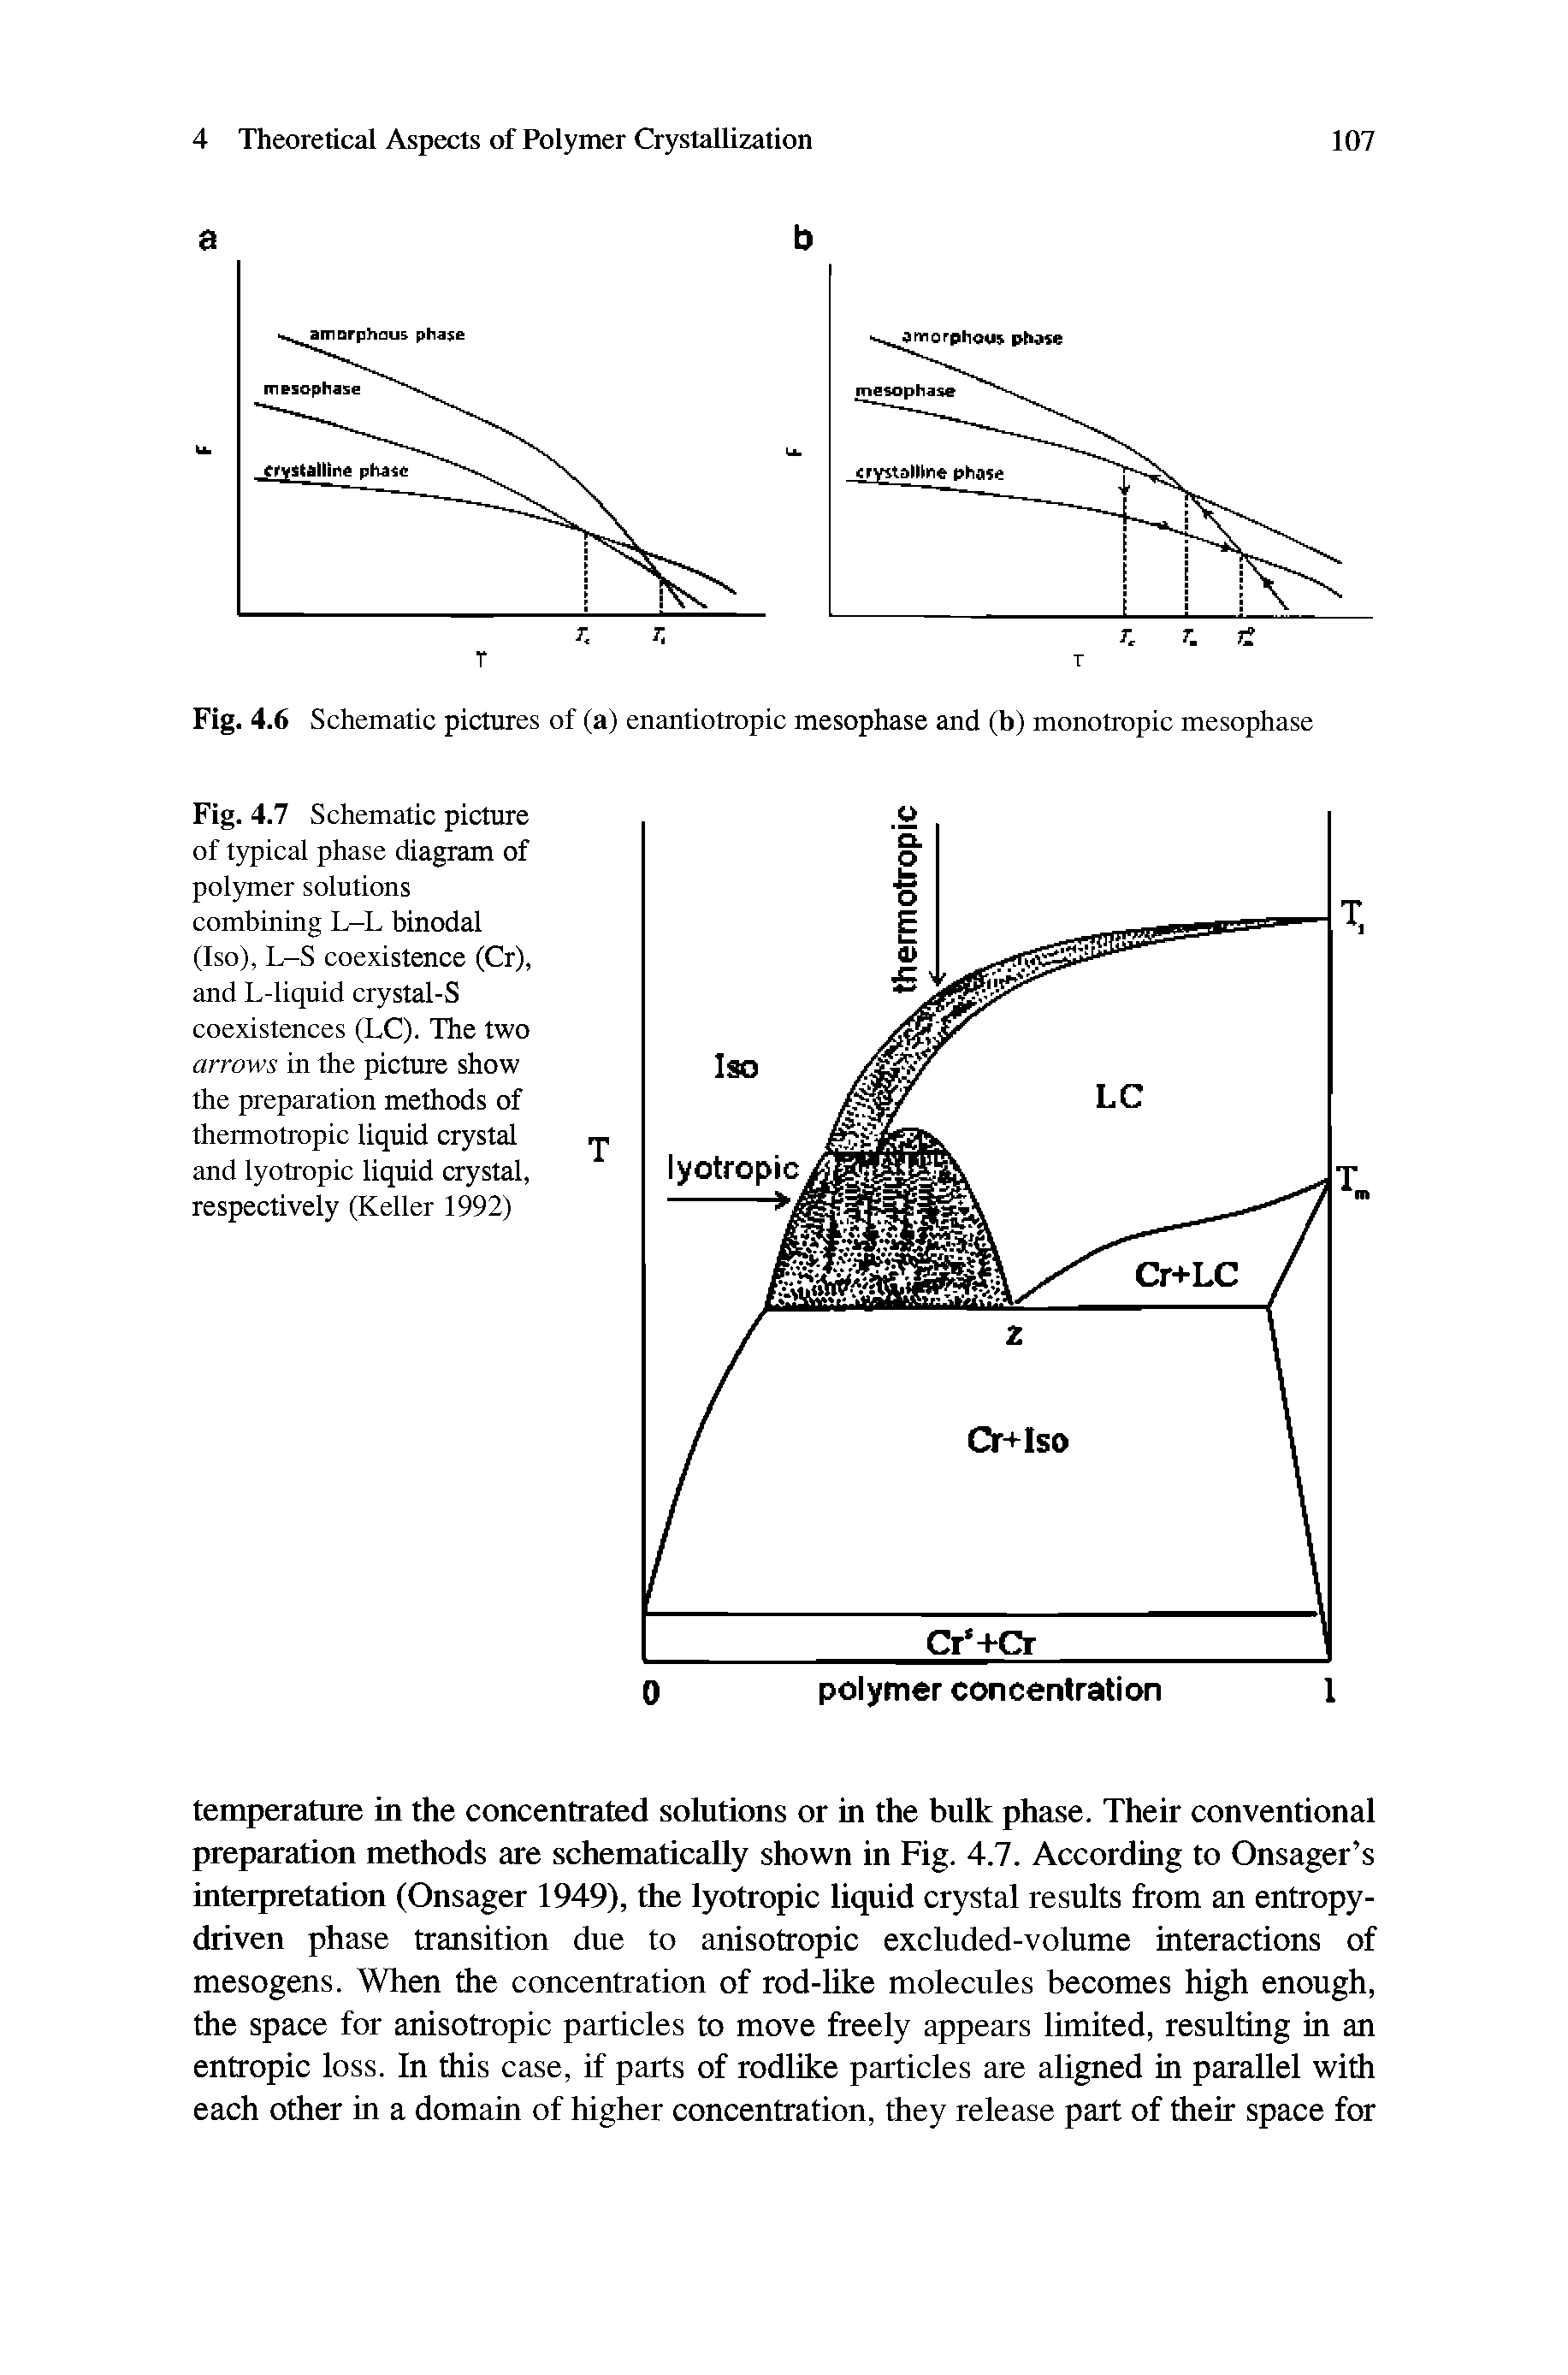 Fig. 4.7 Schematic picture of typical phase diagram of polymer solutions combining L-L binodal (Iso), L-S coexistence (Cr), and L-liquid crystal-S coexistences (LC). The two arrows in the picture show the preparation methods of thermotropic liquid crystal and lyotropic liquid crystal, respectively (Keller 1992)...